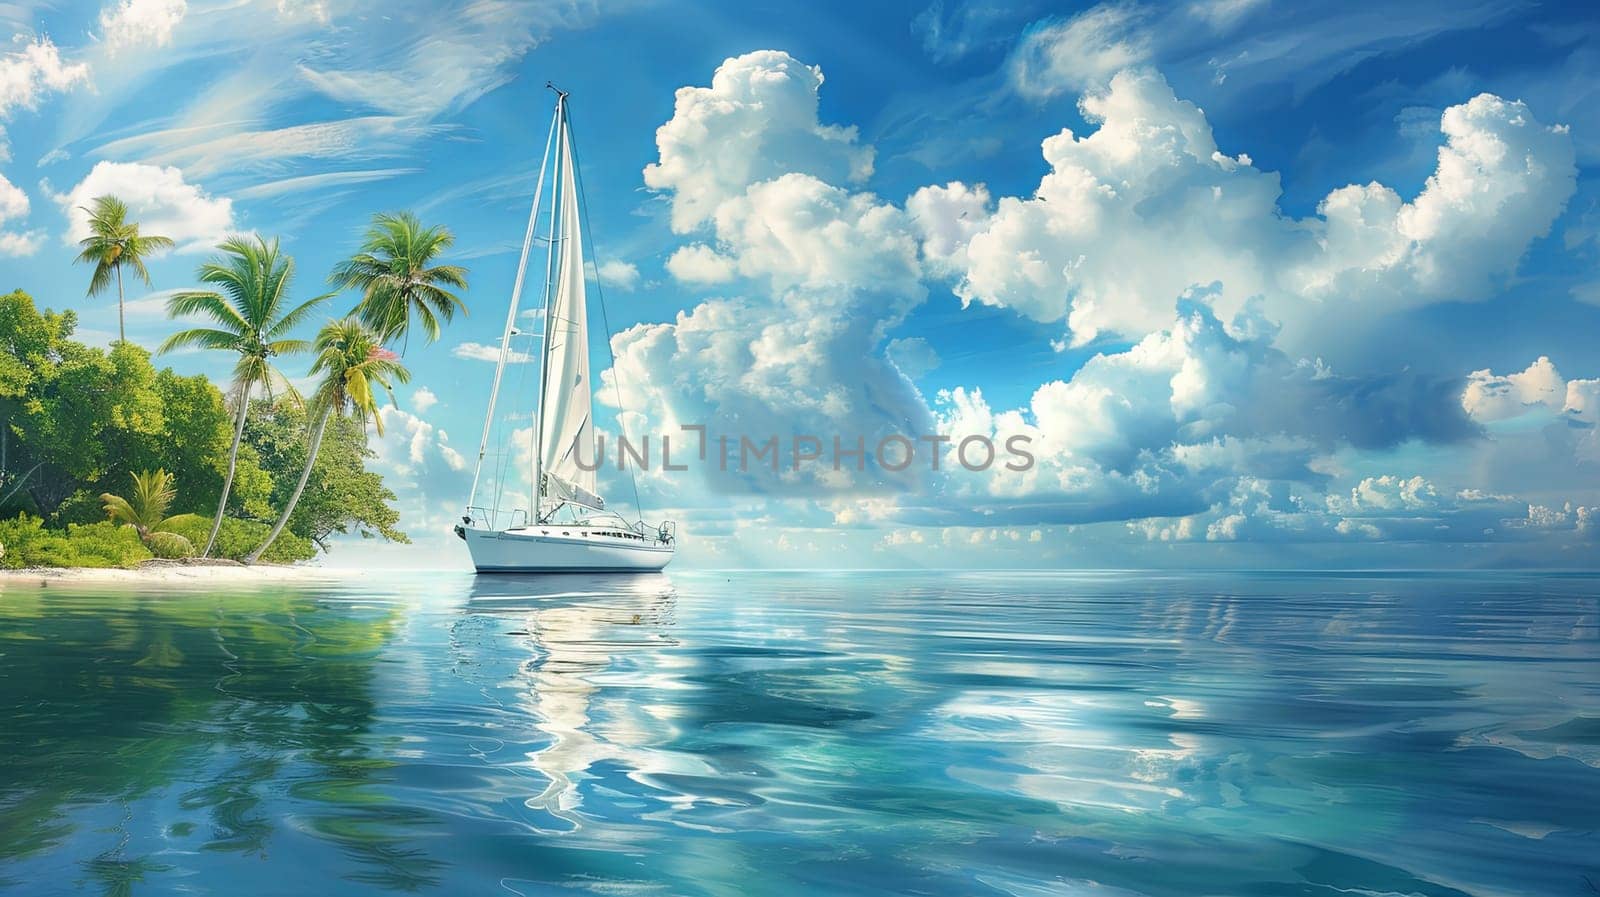 A sailboat glides serenely on crystal-clear waters near a tropical island dotted with lush palm trees.